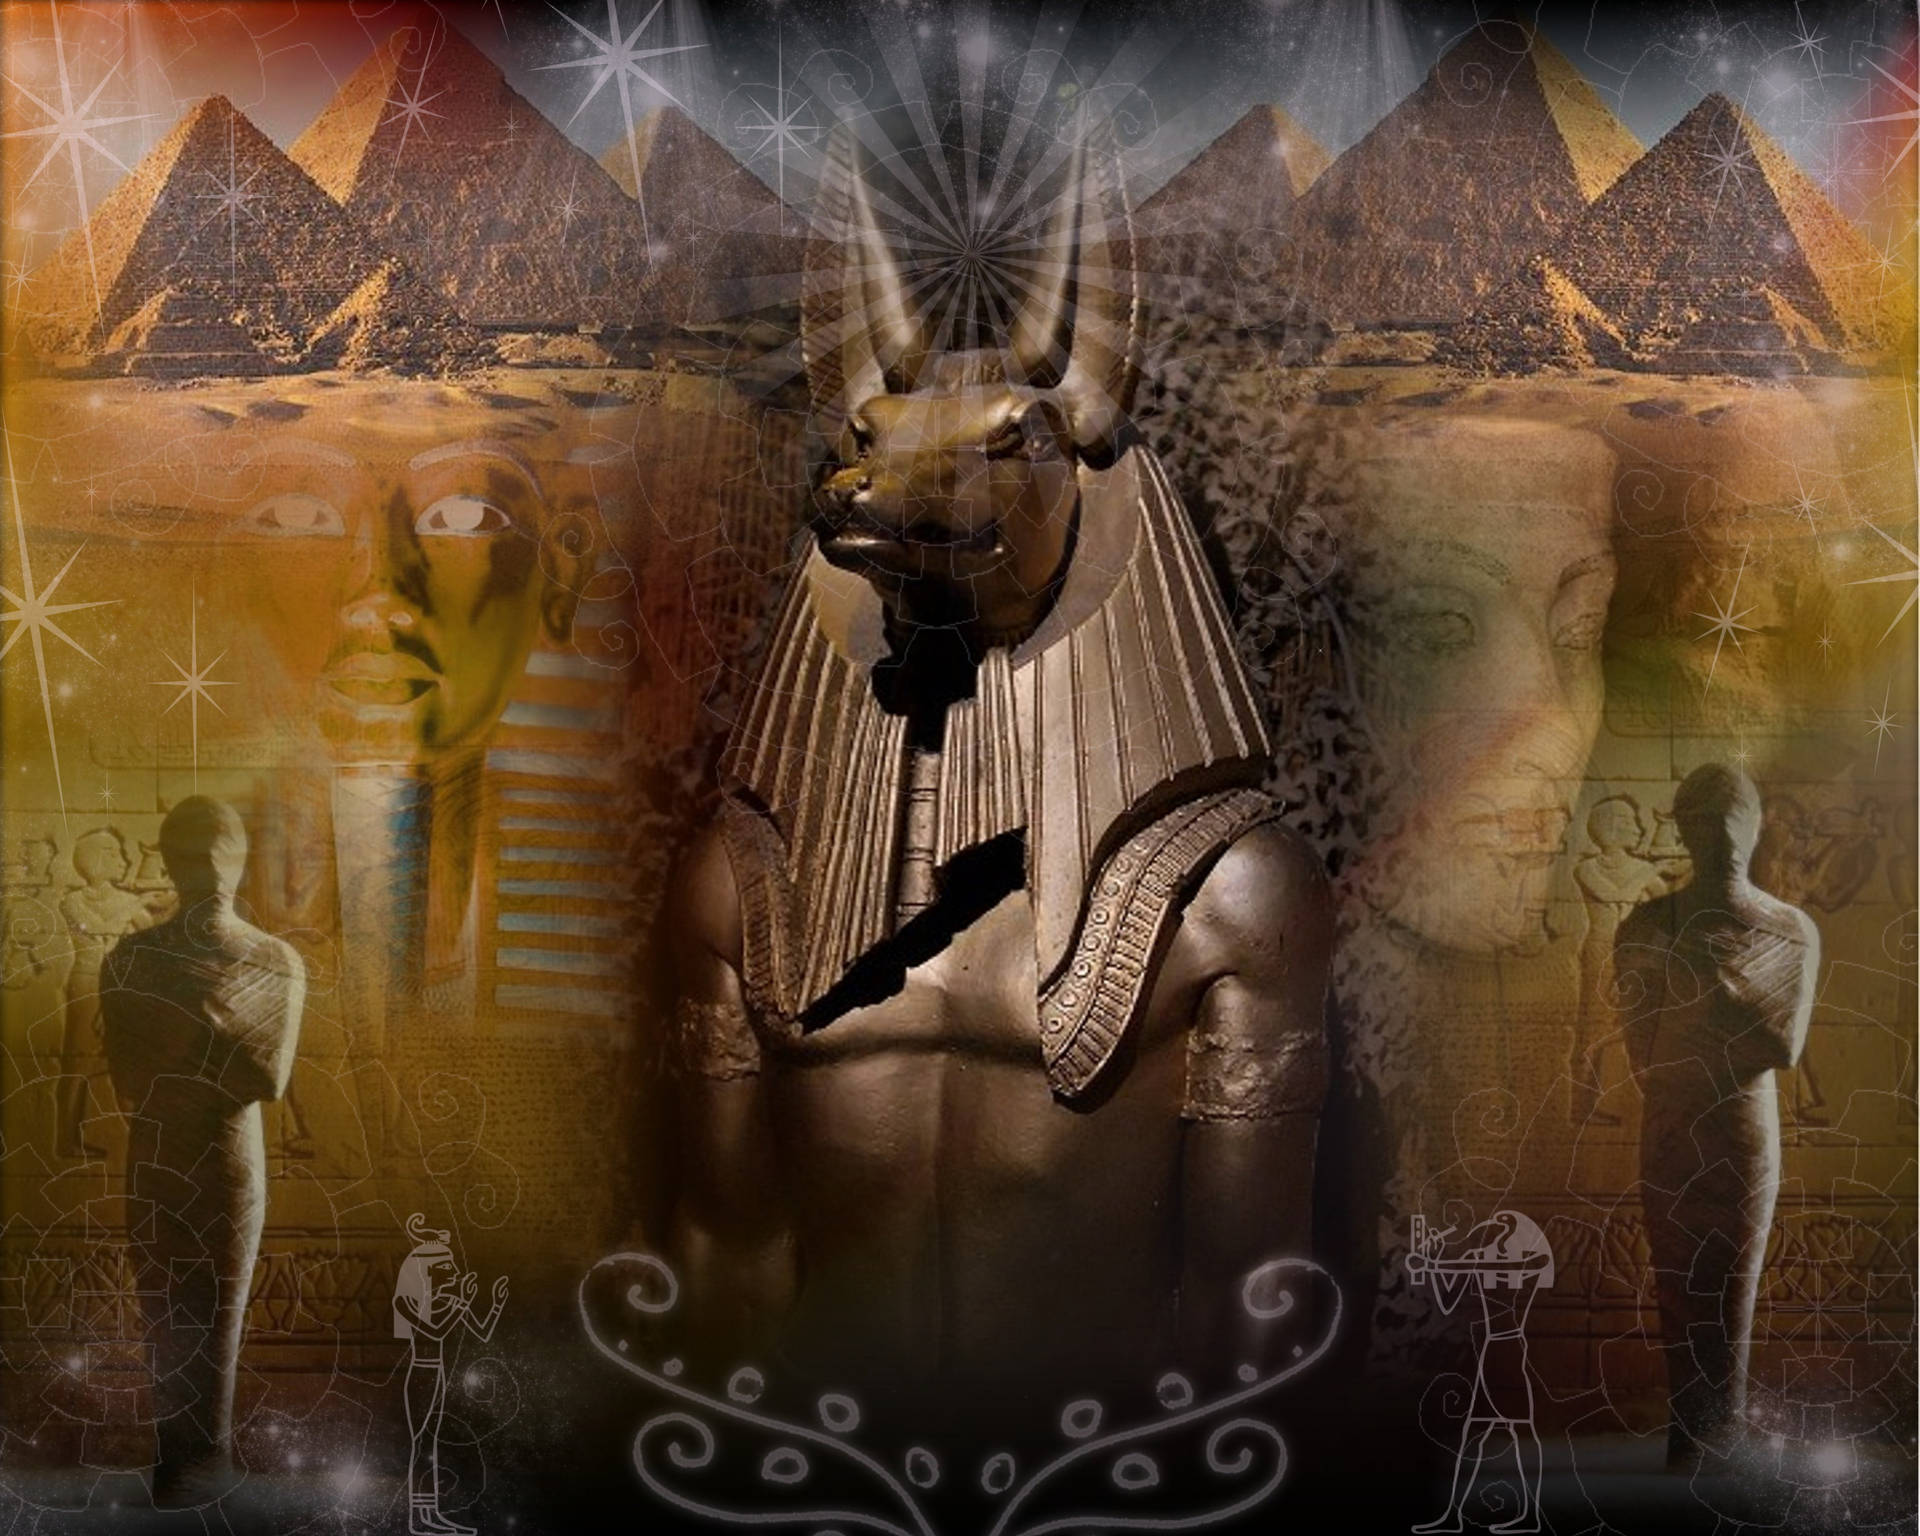 Majestic 4k Anubis - Guardian Of The Afterlife.